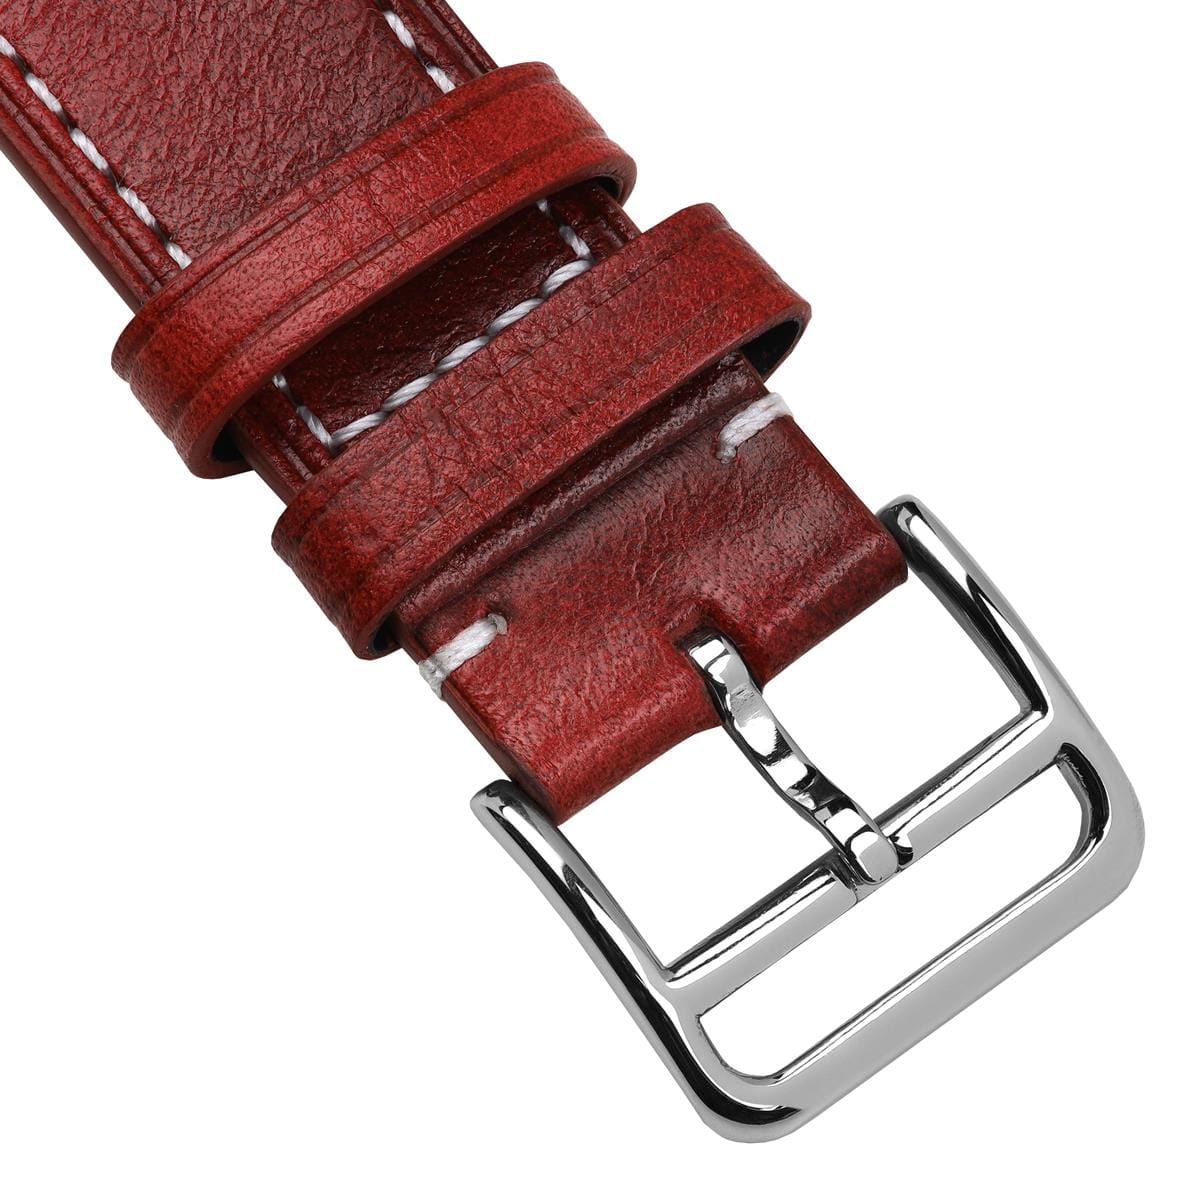 Brixham Special Buckle Classic Leather Watch Strap - Red